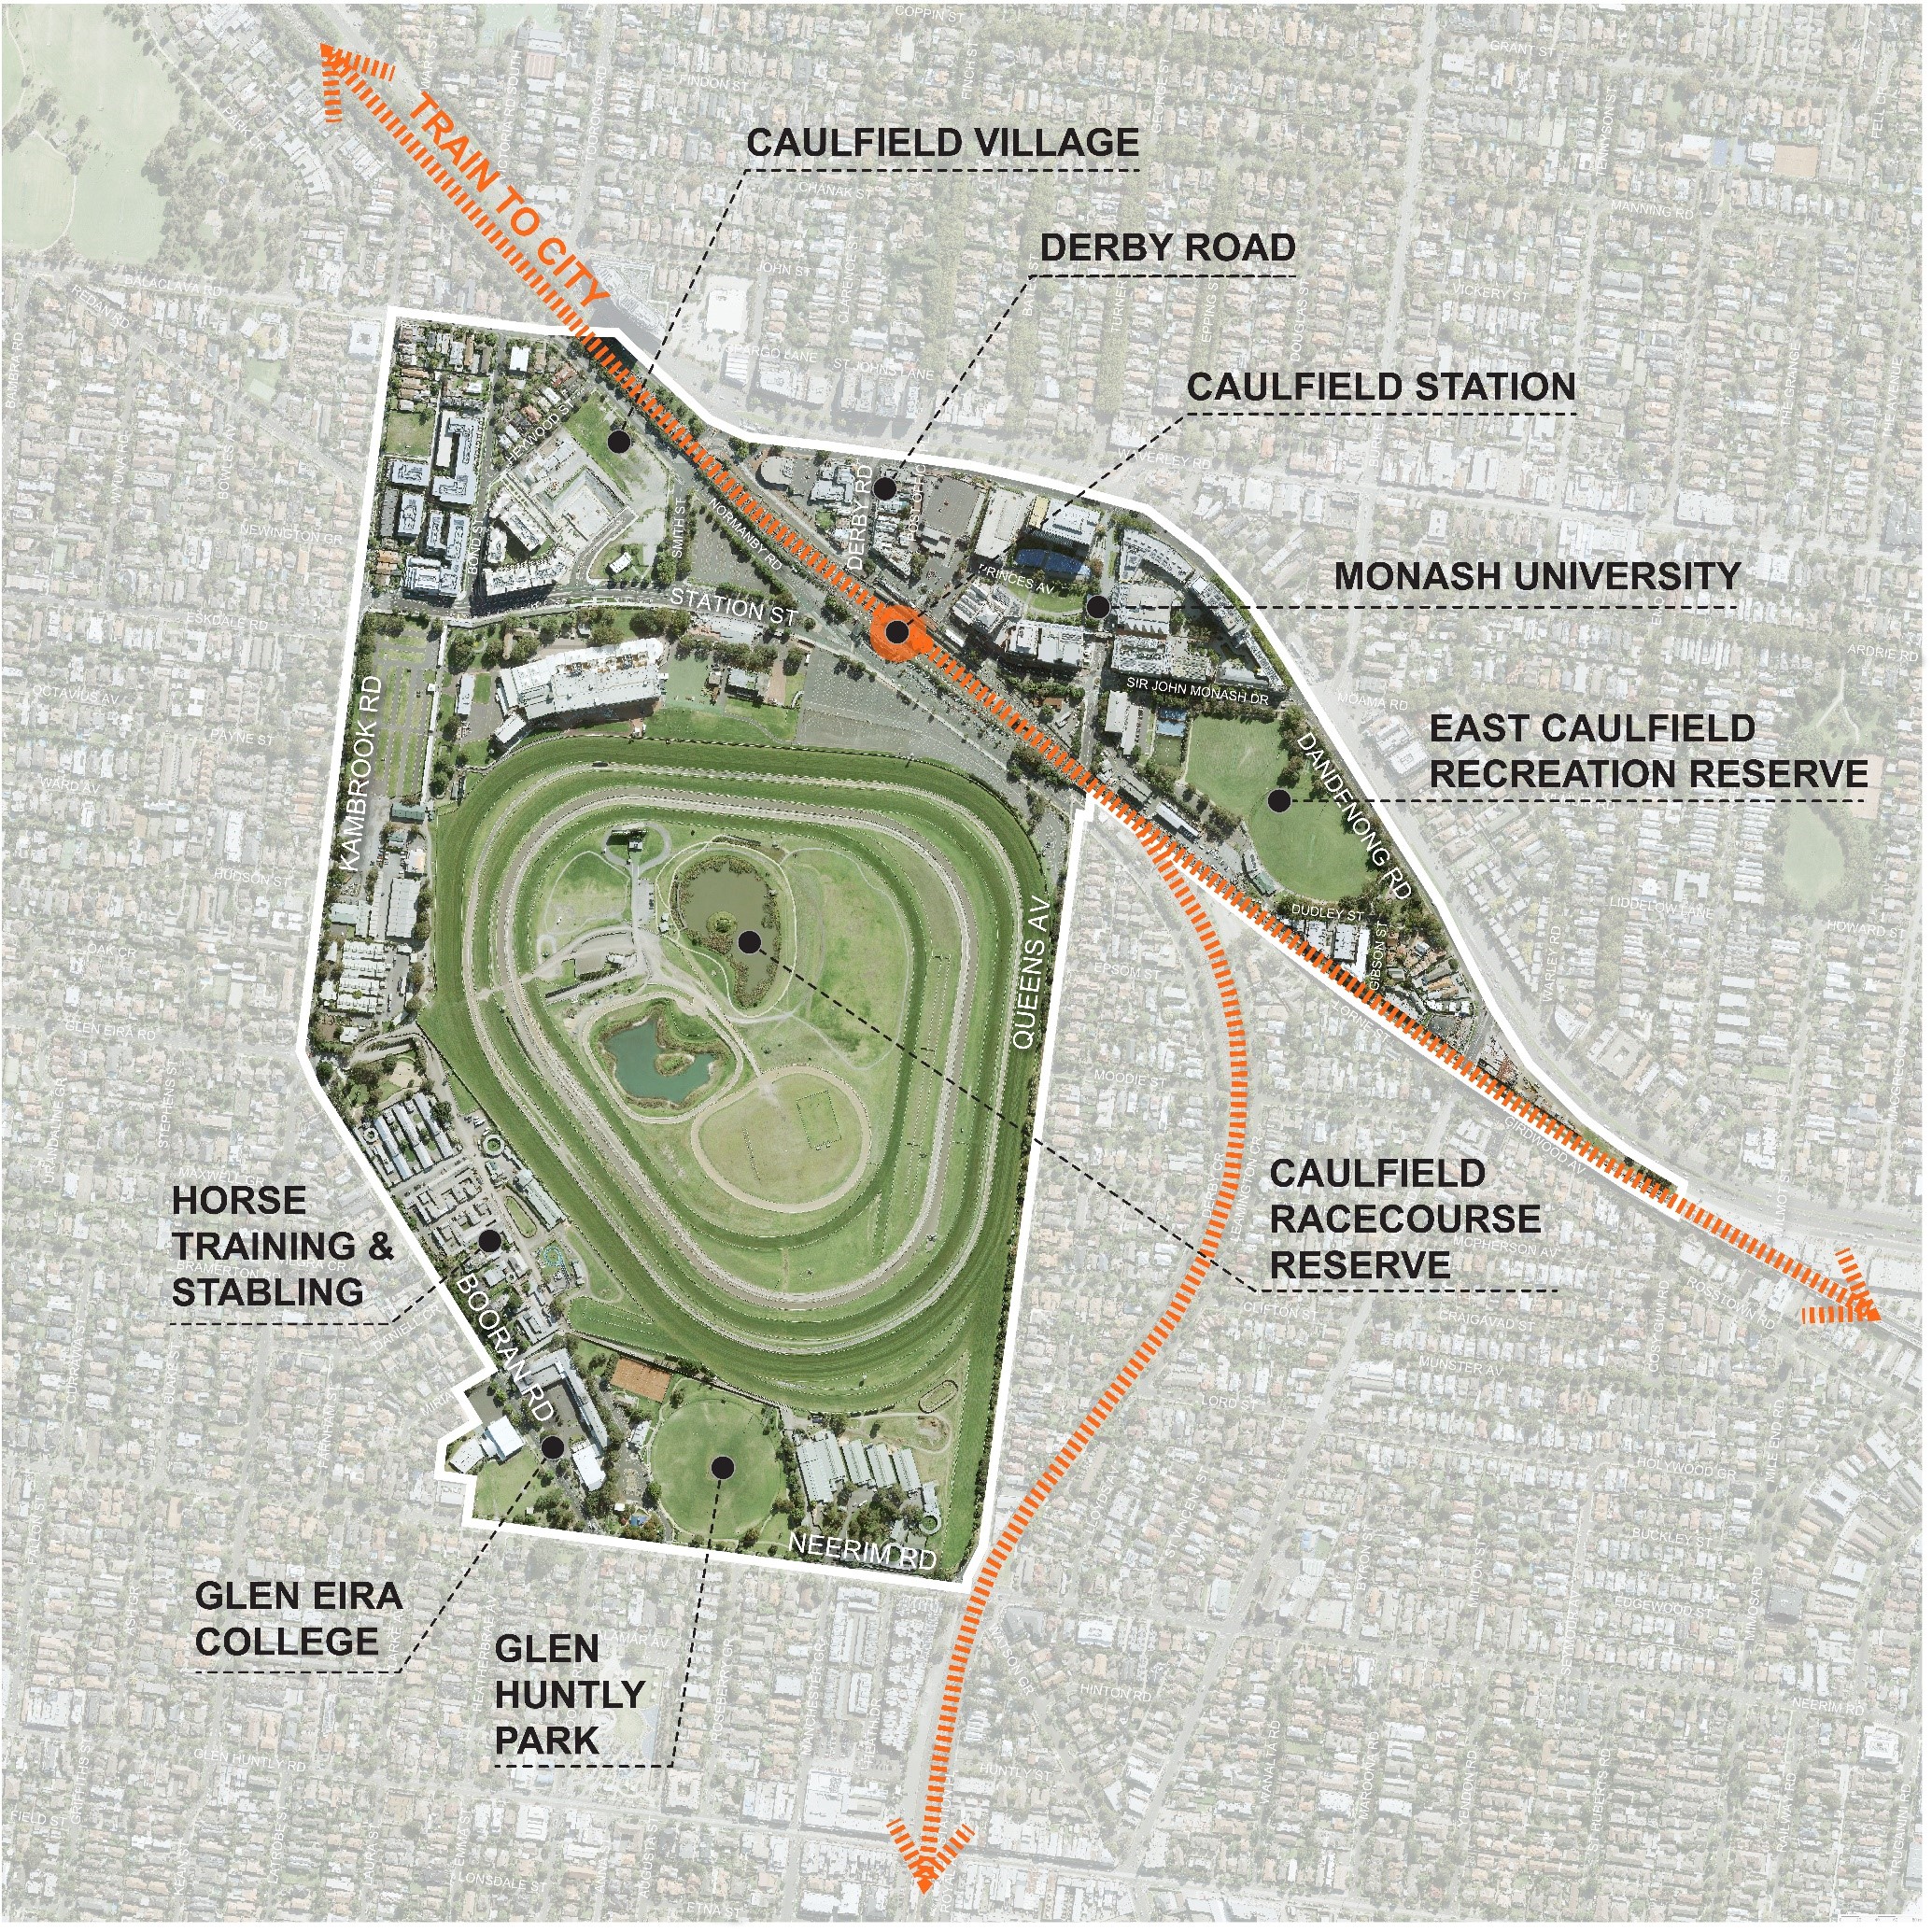 Map showing the boundary of the Caulfield Station Precinct, covering an area including Caulfield Village, Derby Road, Caulfield Station, Monash University, East Caulfield Recreation Reserve, Caulfield Racecourse Reserve, Glen Huntley Park, Glen Eira college and the Horse Training and Stabling area.